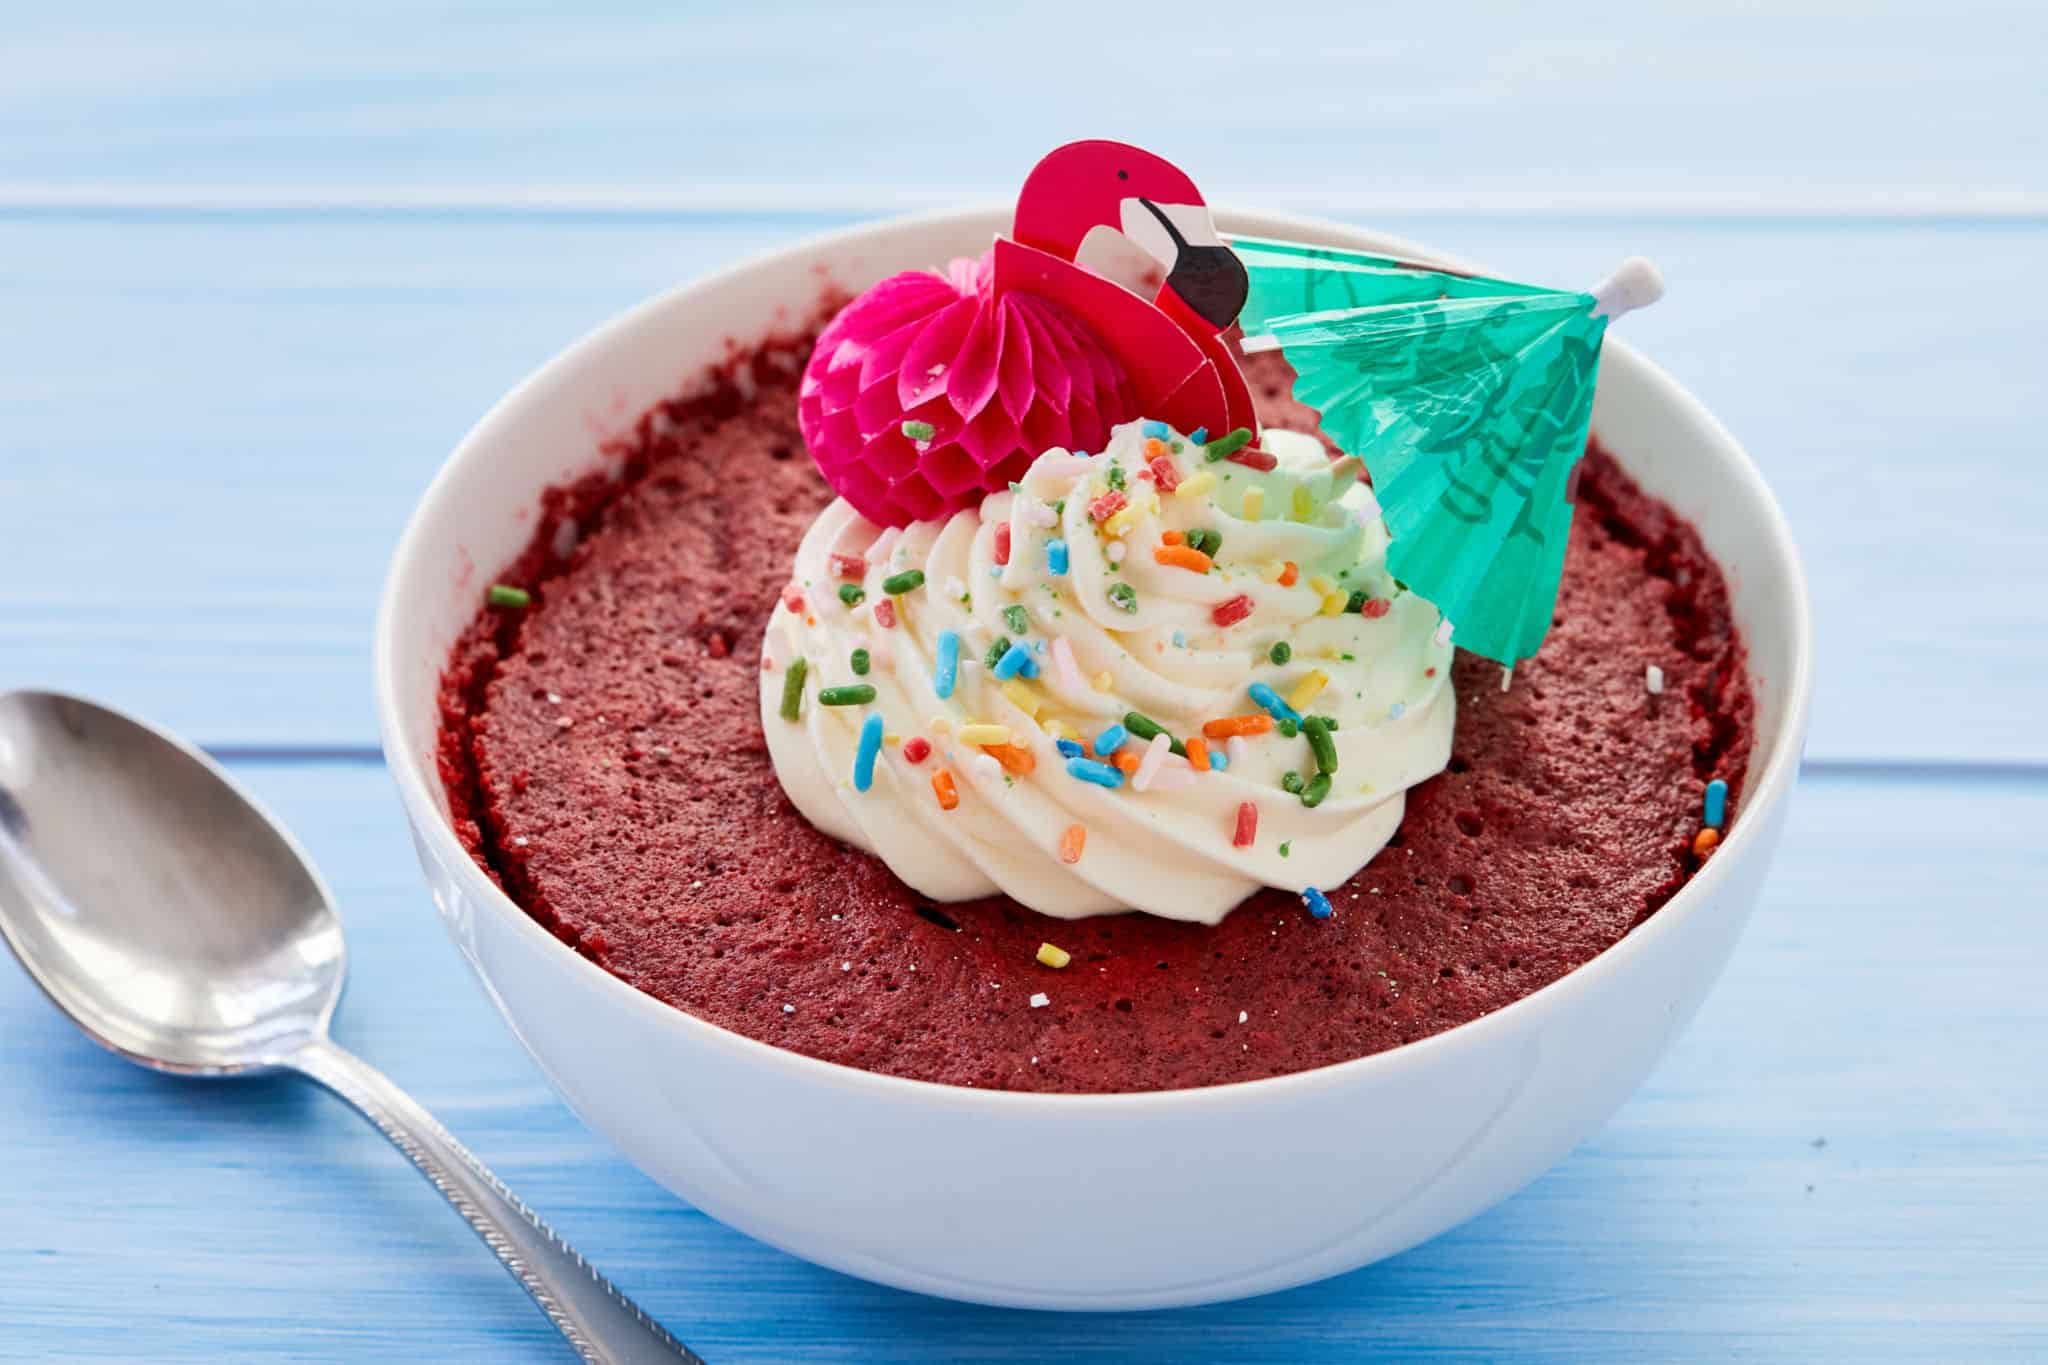 A red velvet cake bowl made in the microwave.